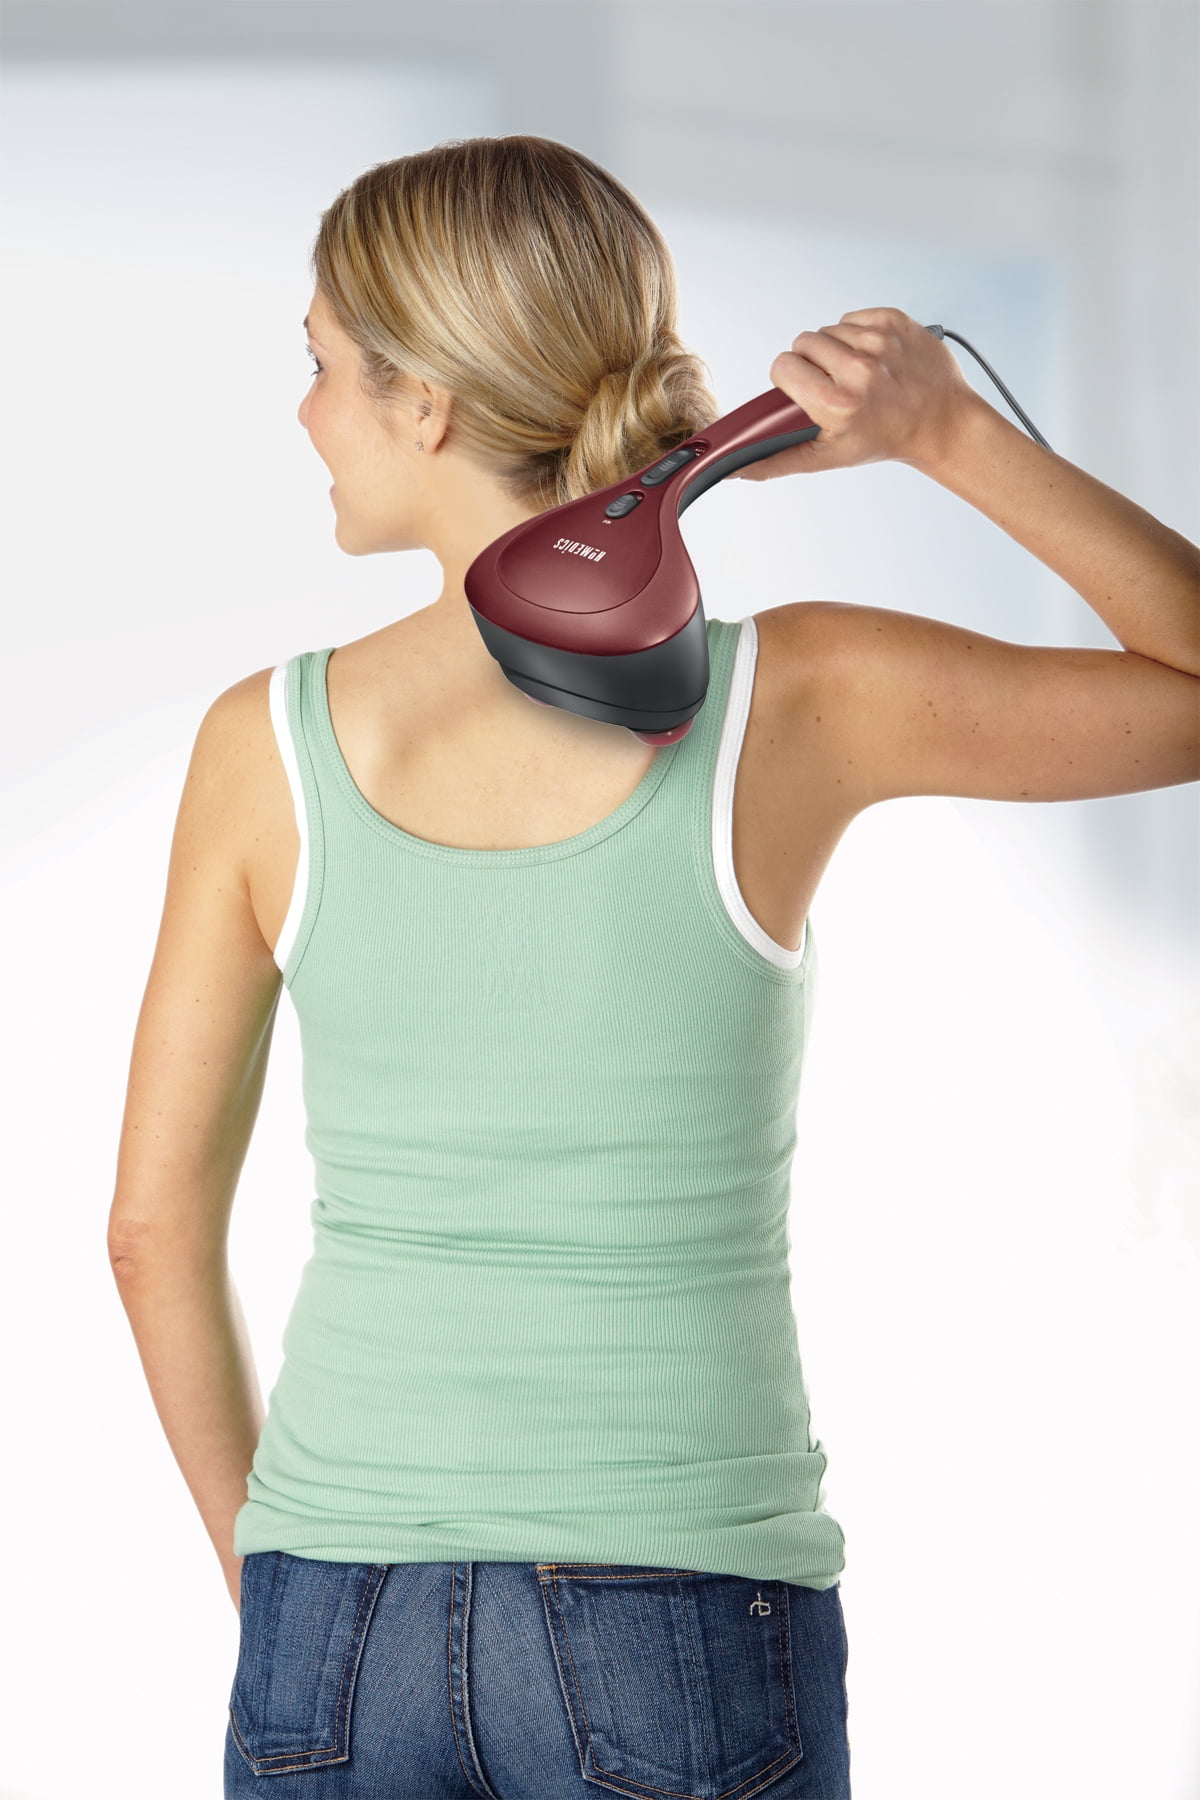 HoMedics Duo Percussion Electric Body Massager with Heat